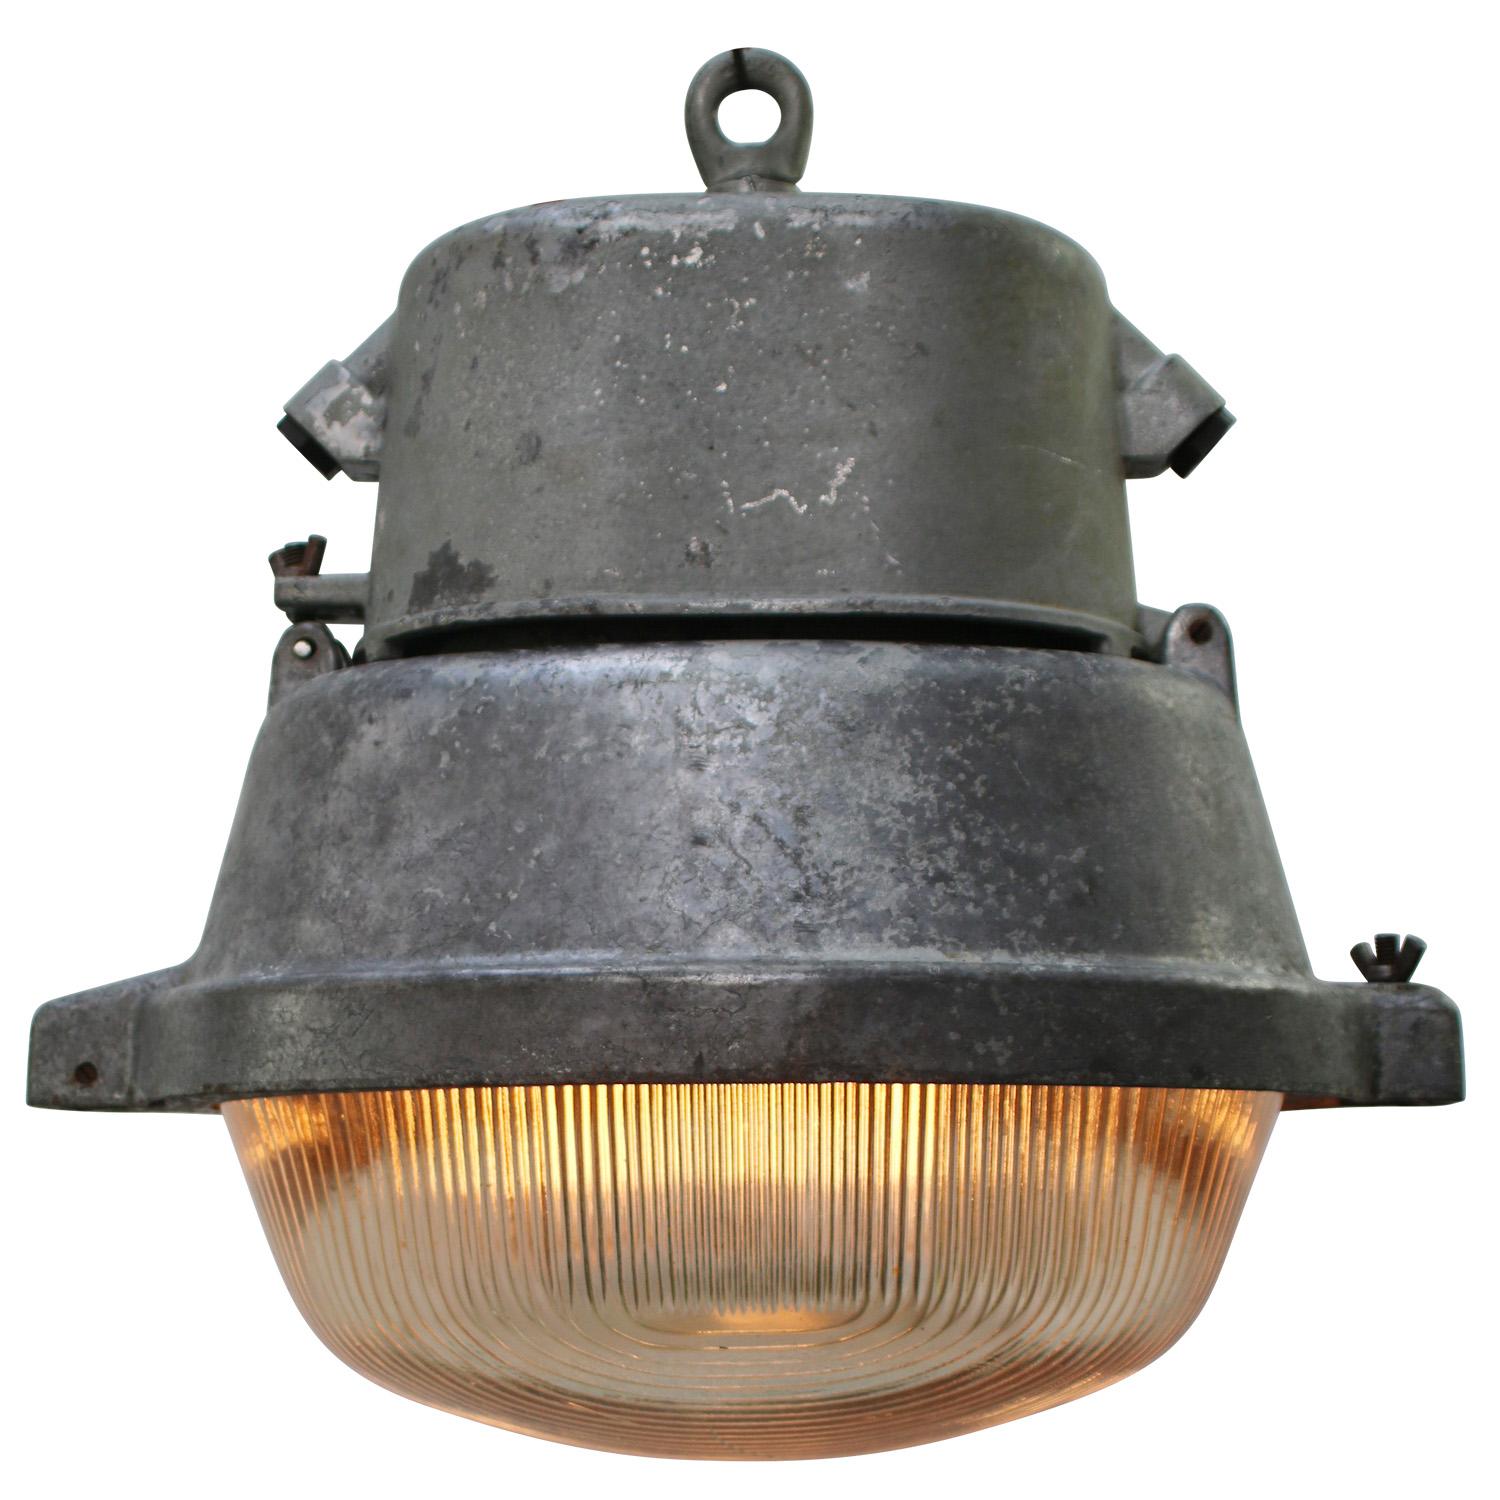 Oval street light
cast aluminum, Holophane glass

Weight: 6.80 kg / 15 lb

Priced per individual item. All lamps have been made suitable by international standards for incandescent light bulbs, energy-efficient and LED bulbs. E26/E27 bulb holders